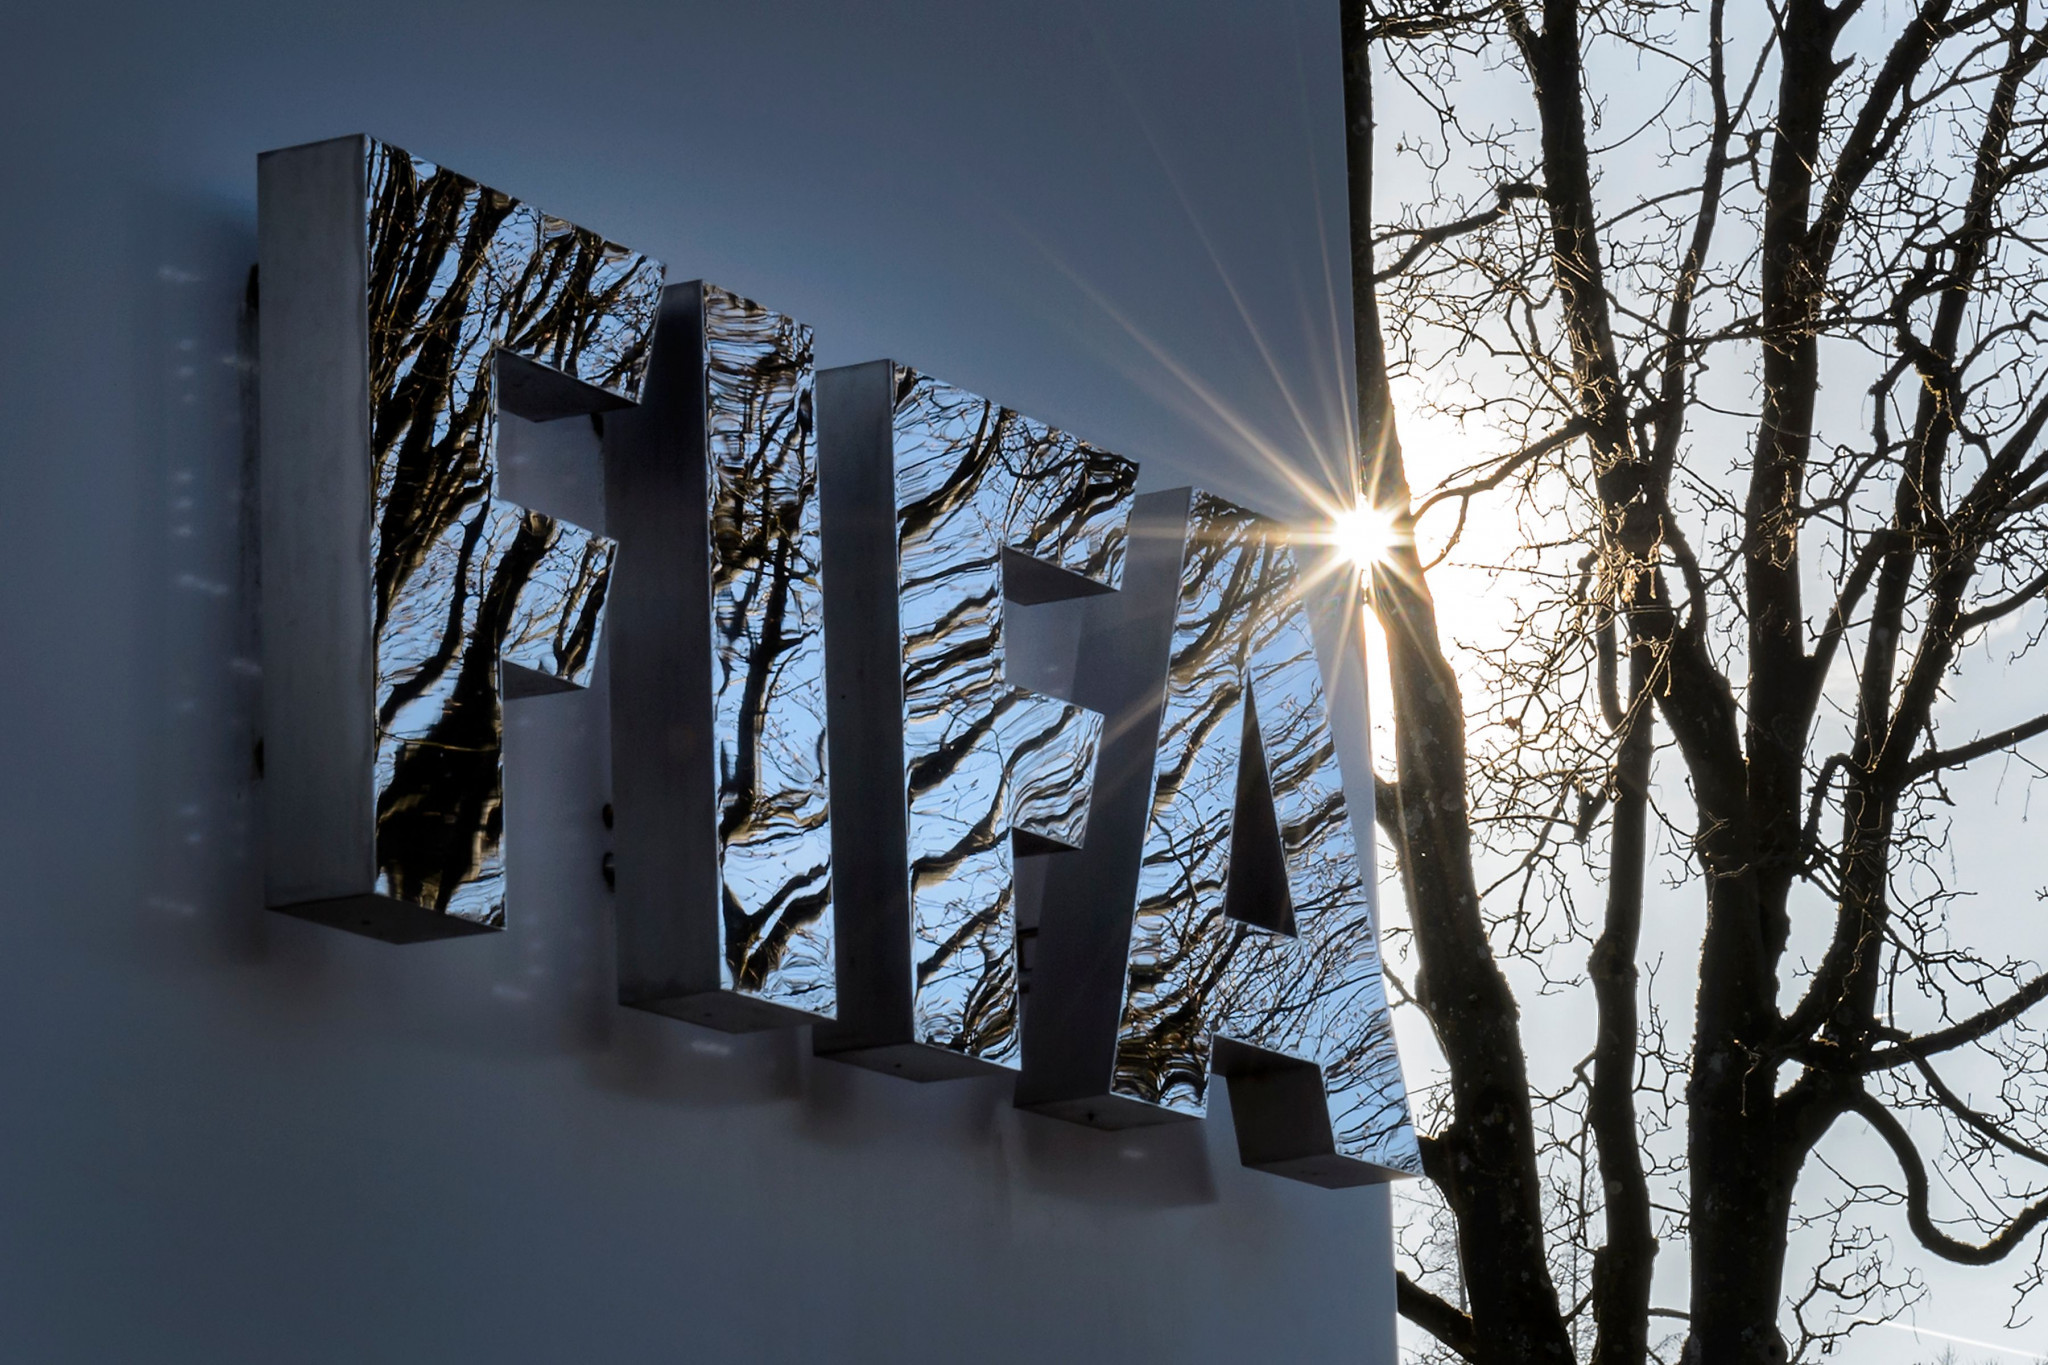 FIFA said the former SLFA official had been sanctioned as part of an investigation into known match fixer Wilson Raj Perumal ©Getty Images